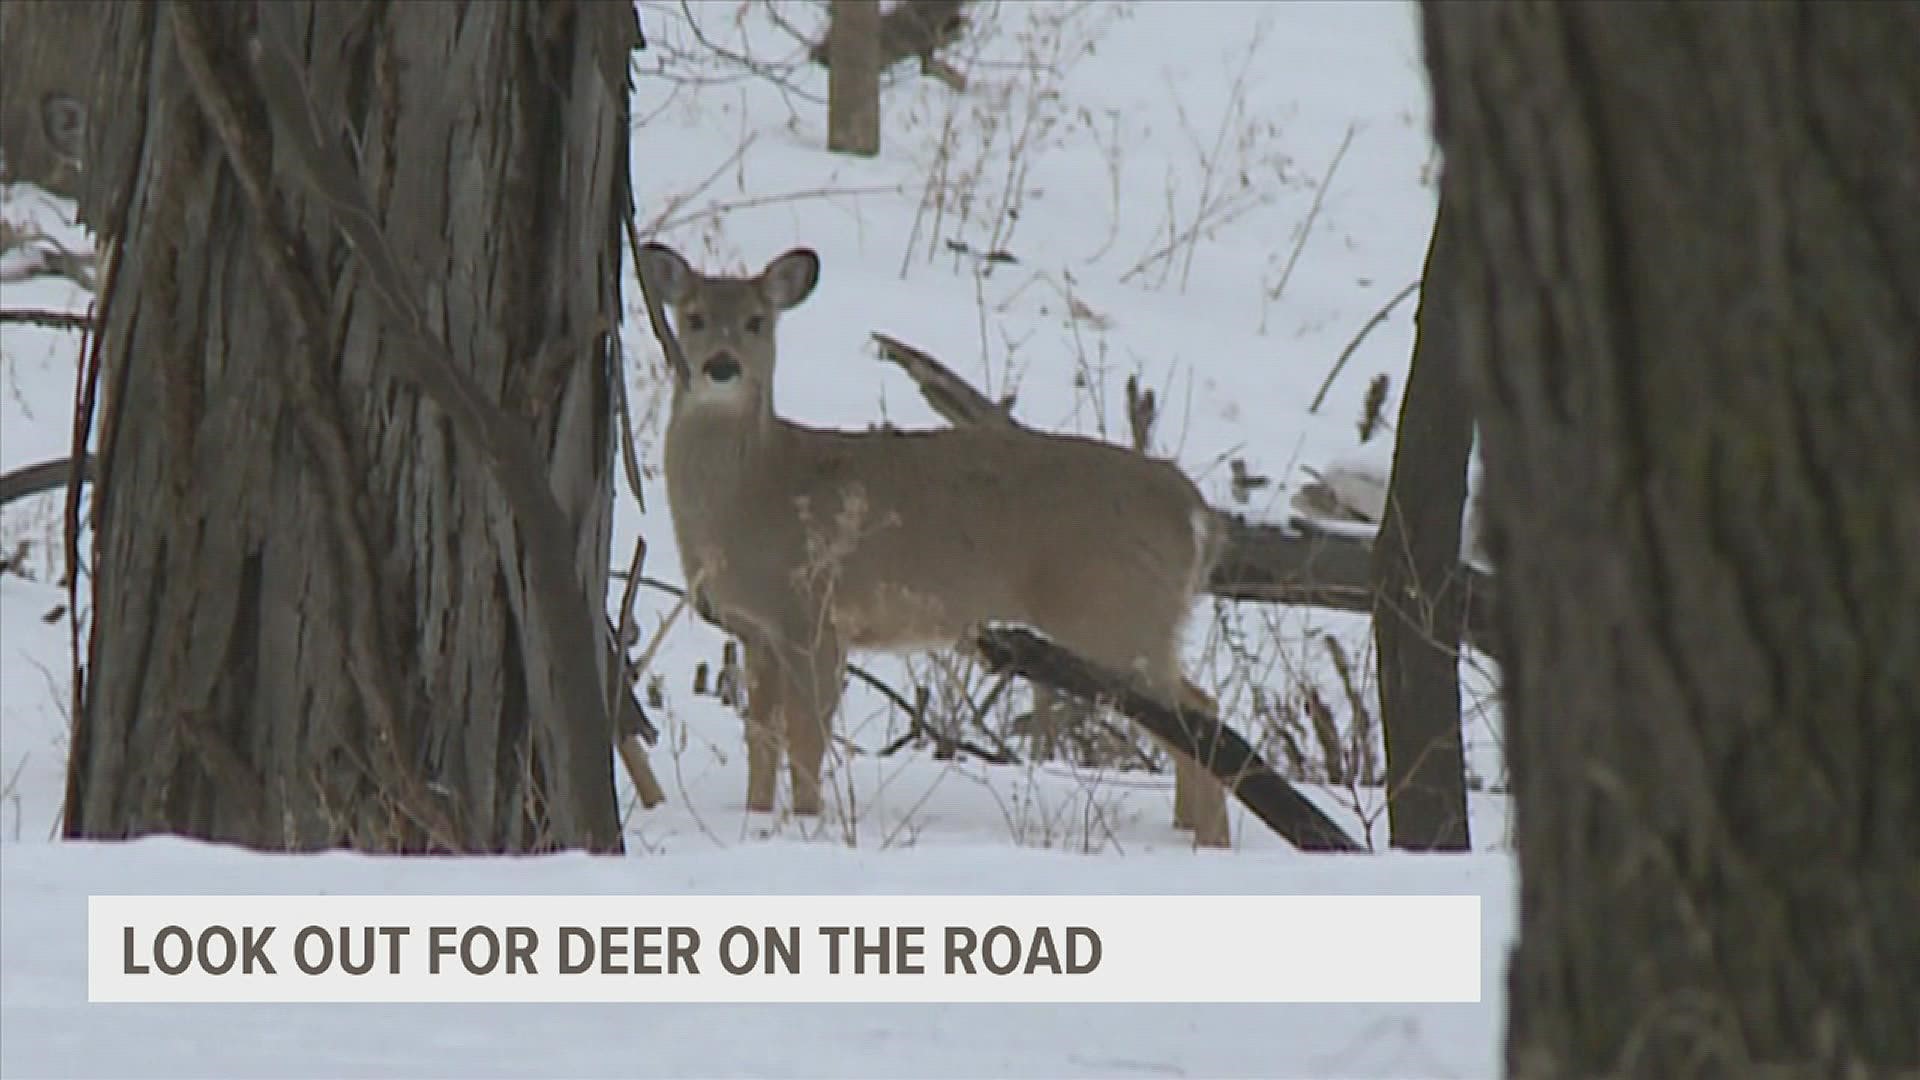 Deer are on the move in both Iowa and Illinois as peak breeding season for white-tailed deer begins. Experts are warning drivers to be vigilant of deer when driving.